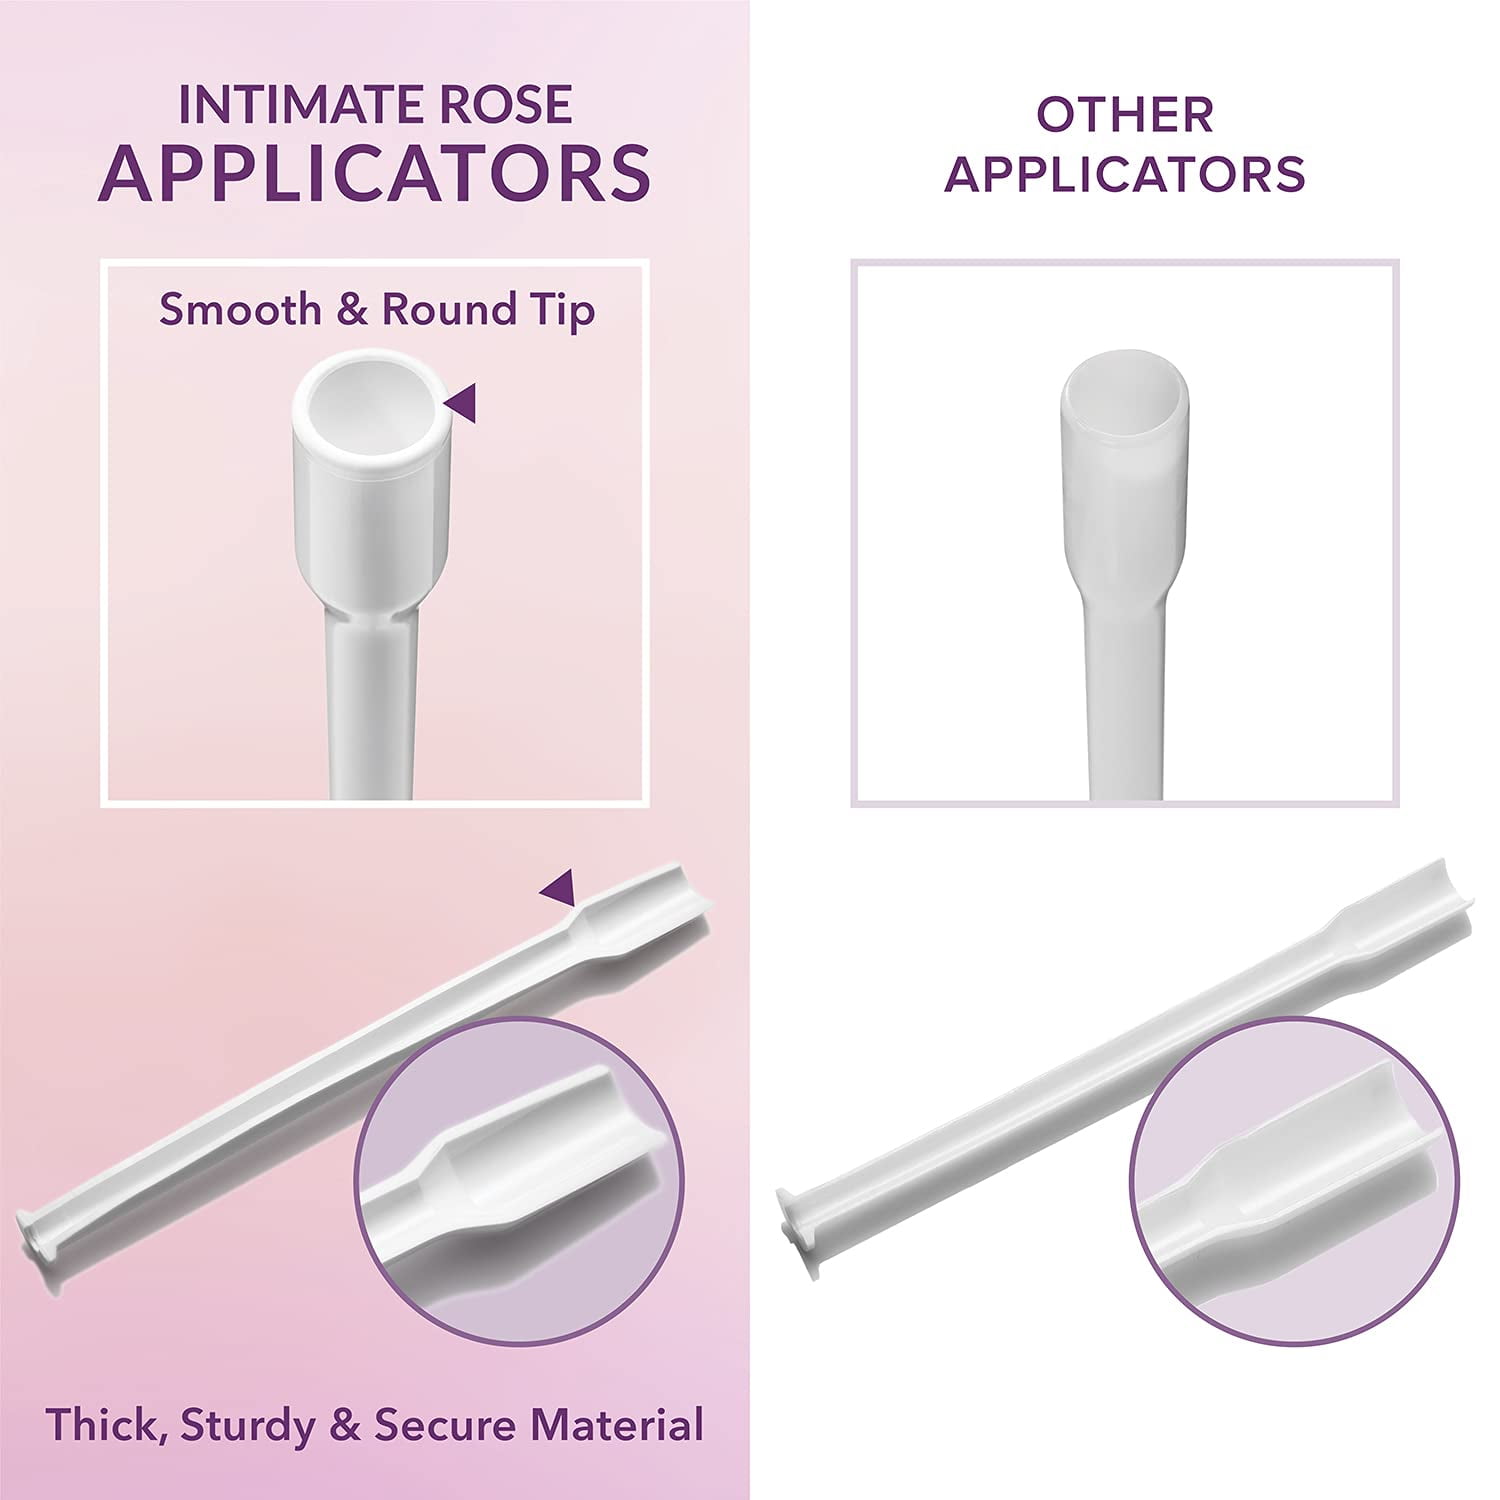 Design aspects of vaginal applicators that influence acceptance